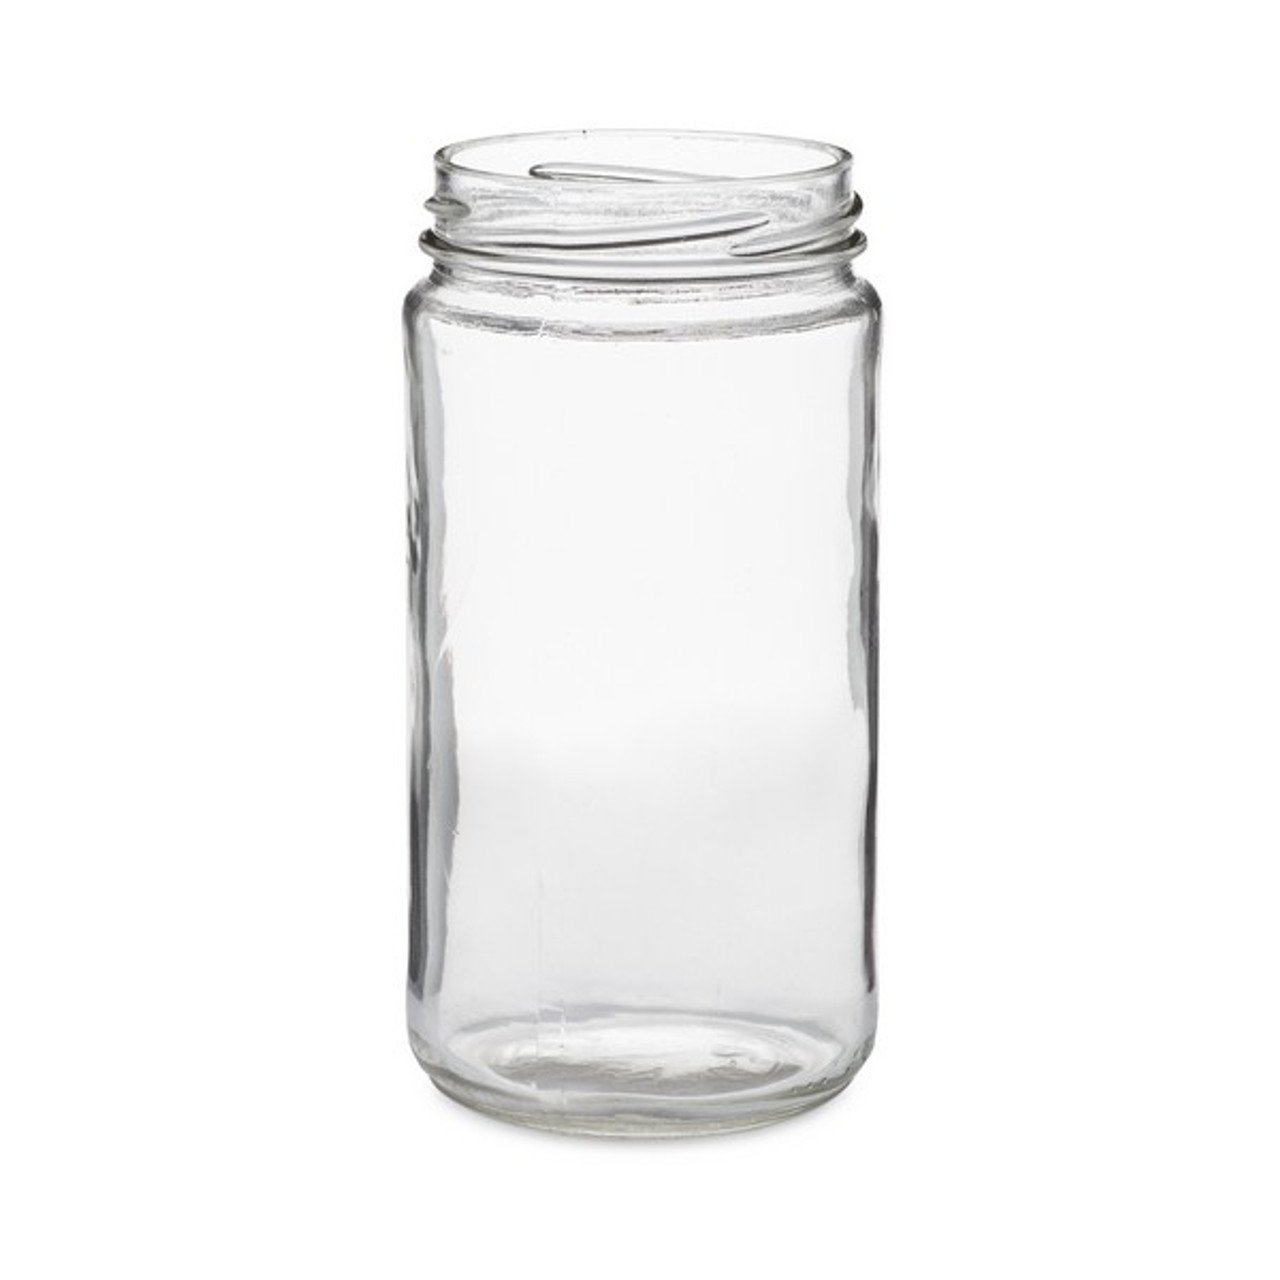 Download 12 oz Clear Glass Paragon Jars (Cap Not Included) | Berlin